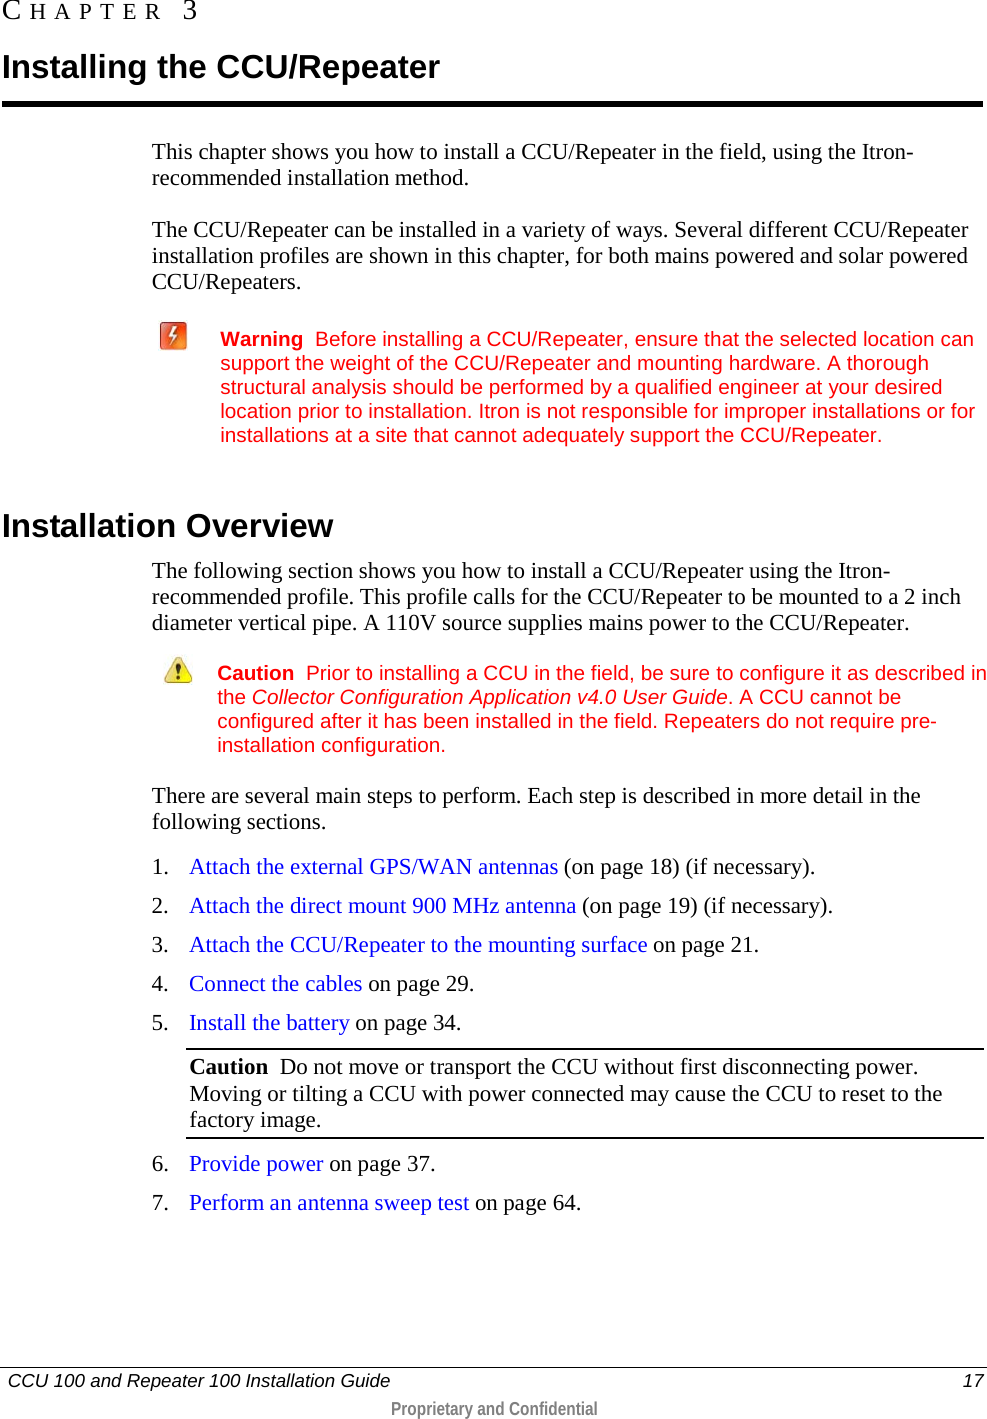   CCU 100 and Repeater 100 Installation Guide    17  Proprietary and Confidential  This chapter shows you how to install a CCU/Repeater in the field, using the Itron-recommended installation method.  The CCU/Repeater can be installed in a variety of ways. Several different CCU/Repeater installation profiles are shown in this chapter, for both mains powered and solar powered CCU/Repeaters.   Warning  Before installing a CCU/Repeater, ensure that the selected location can support the weight of the CCU/Repeater and mounting hardware. A thorough structural analysis should be performed by a qualified engineer at your desired location prior to installation. Itron is not responsible for improper installations or for installations at a site that cannot adequately support the CCU/Repeater.    Installation Overview The following section shows you how to install a CCU/Repeater using the Itron-recommended profile. This profile calls for the CCU/Repeater to be mounted to a 2 inch diameter vertical pipe. A 110V source supplies mains power to the CCU/Repeater.   Caution  Prior to installing a CCU in the field, be sure to configure it as described in the Collector Configuration Application v4.0 User Guide. A CCU cannot be configured after it has been installed in the field. Repeaters do not require pre-installation configuration. There are several main steps to perform. Each step is described in more detail in the following sections.  1. Attach the external GPS/WAN antennas (on page 18) (if necessary). 2. Attach the direct mount 900 MHz antenna (on page 19) (if necessary). 3. Attach the CCU/Repeater to the mounting surface on page 21. 4. Connect the cables on page 29. 5. Install the battery on page 34. Caution  Do not move or transport the CCU without first disconnecting power.  Moving or tilting a CCU with power connected may cause the CCU to reset to the factory image. 6. Provide power on page 37. 7. Perform an antenna sweep test on page 64.  CHAPTER  3  Installing the CCU/Repeater 